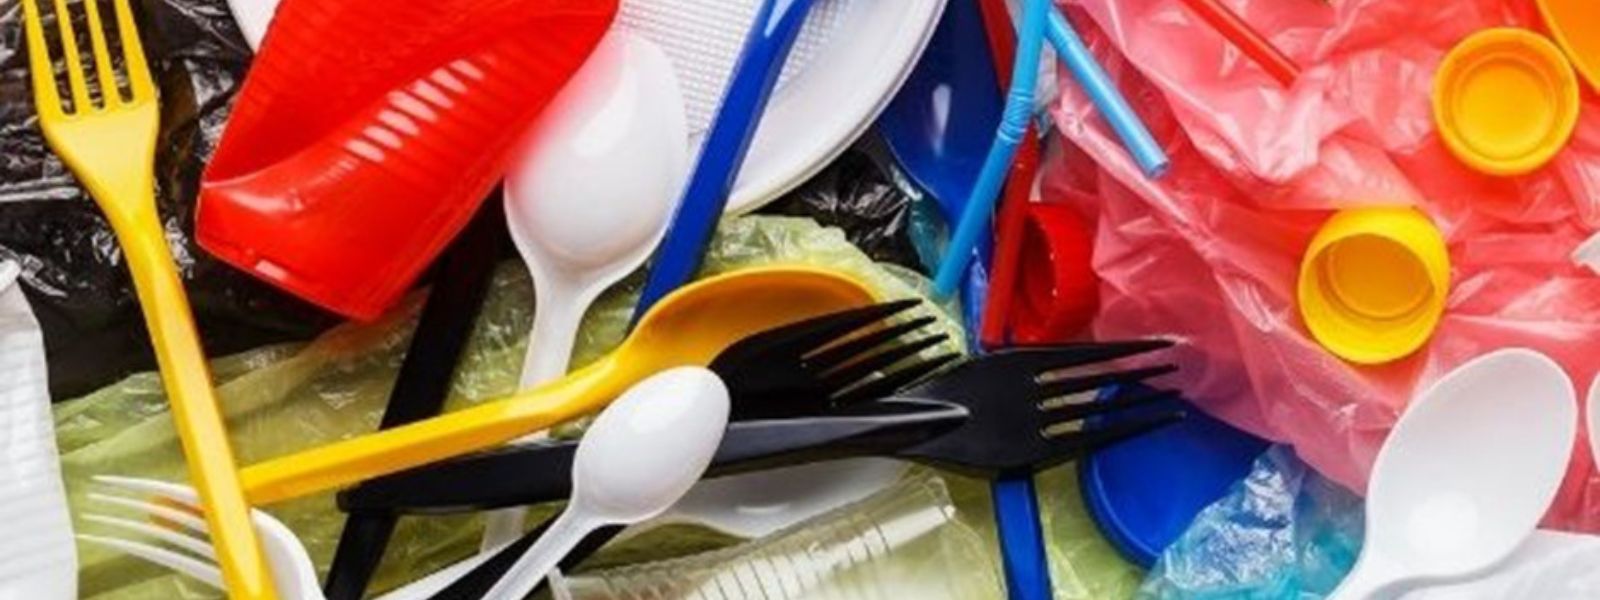 Ten types of plastic items banned from today